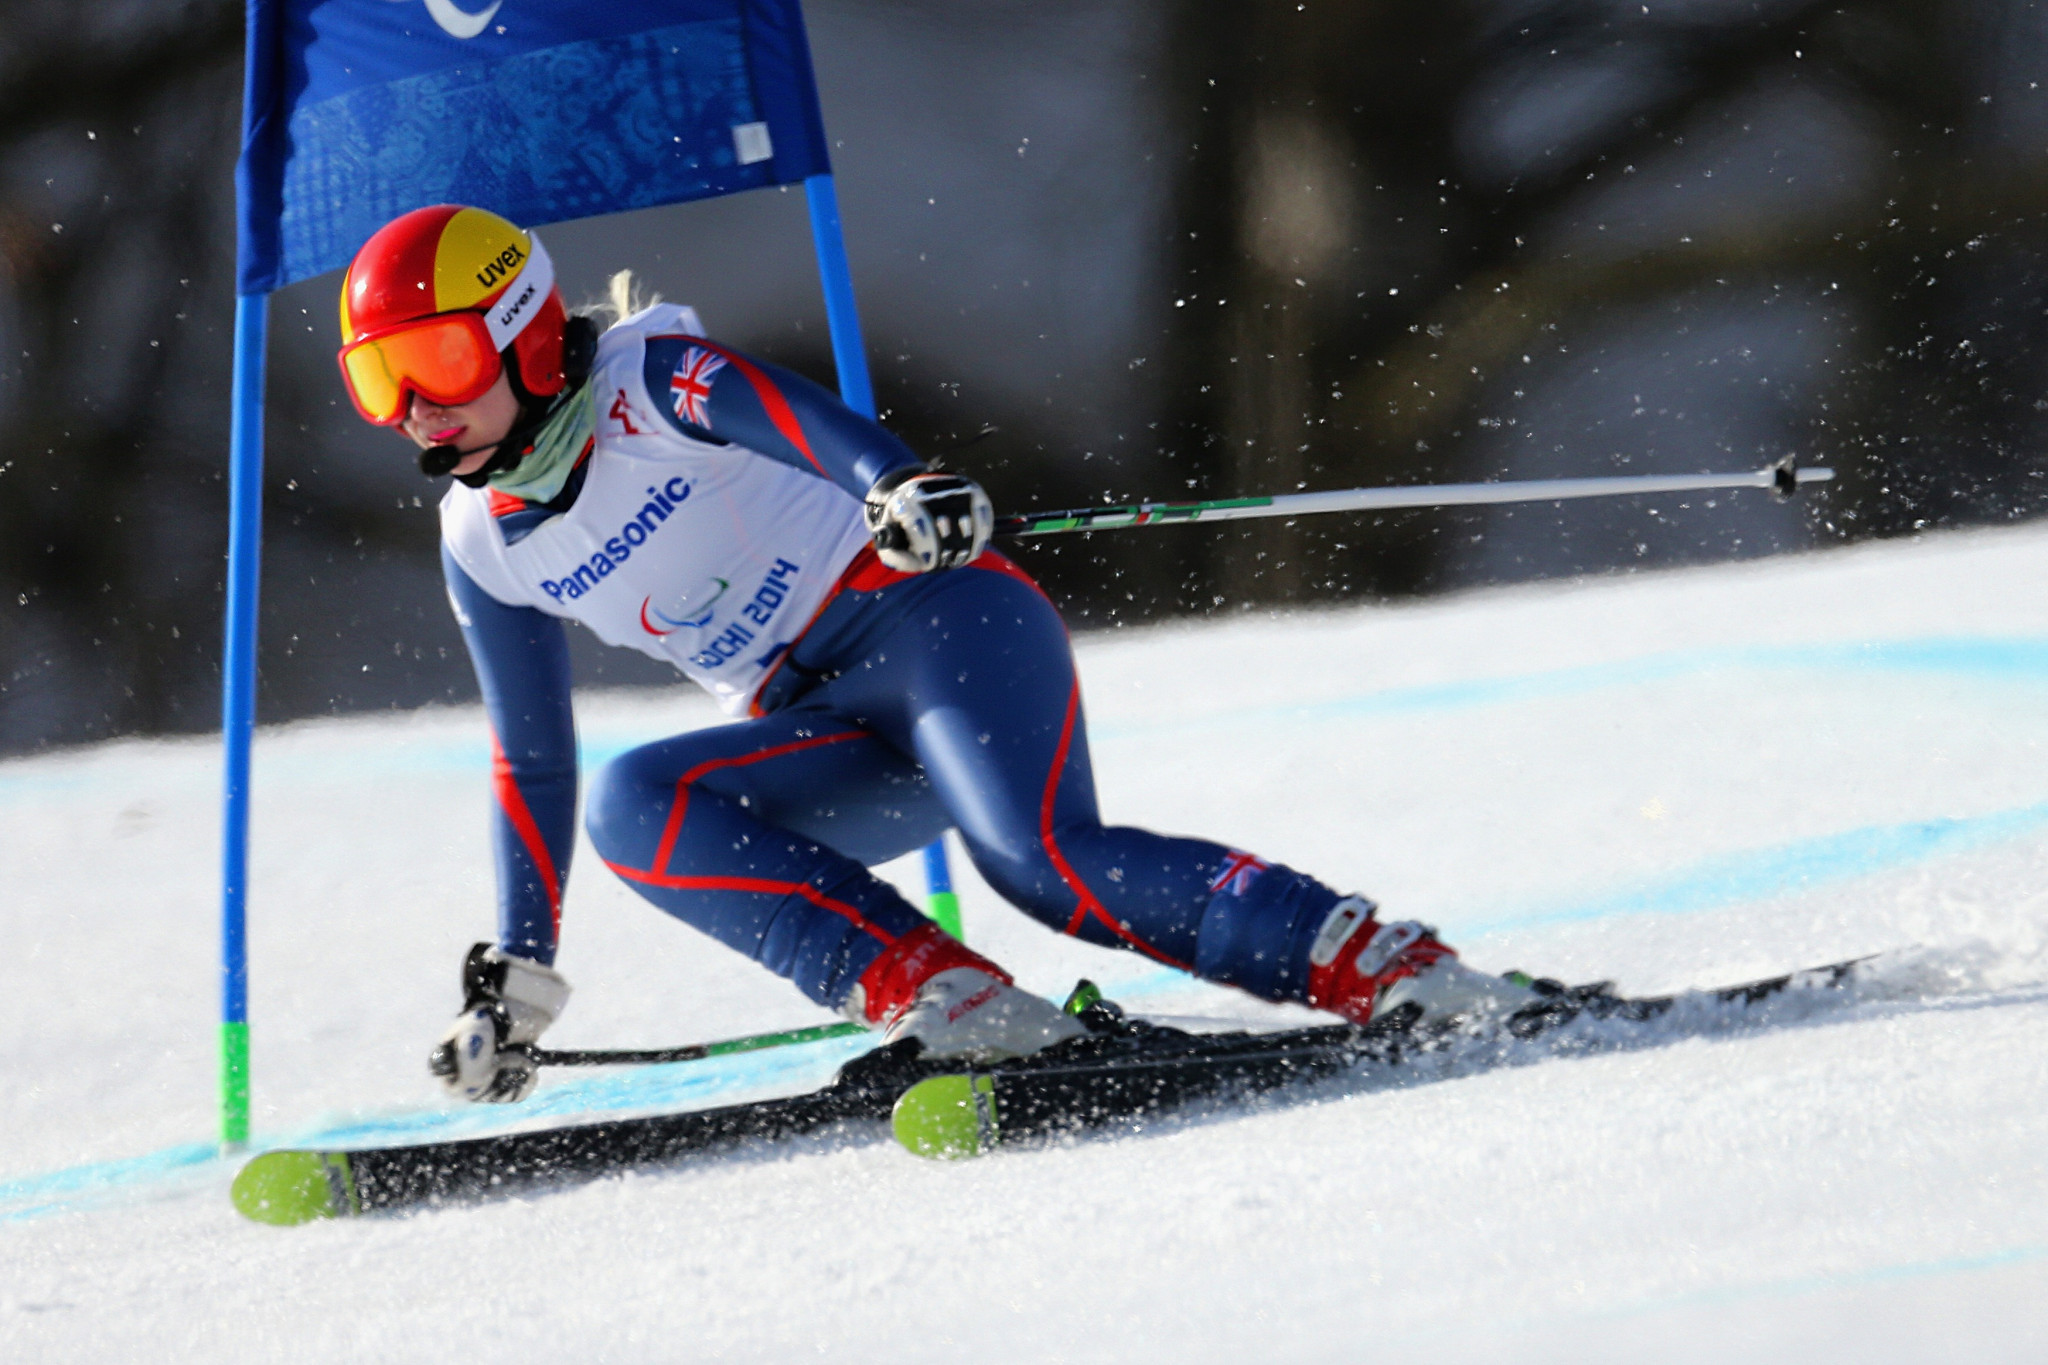 History-maker Gallagher confirmed for British Paralympic team in Pyeongchang with new guide Smith